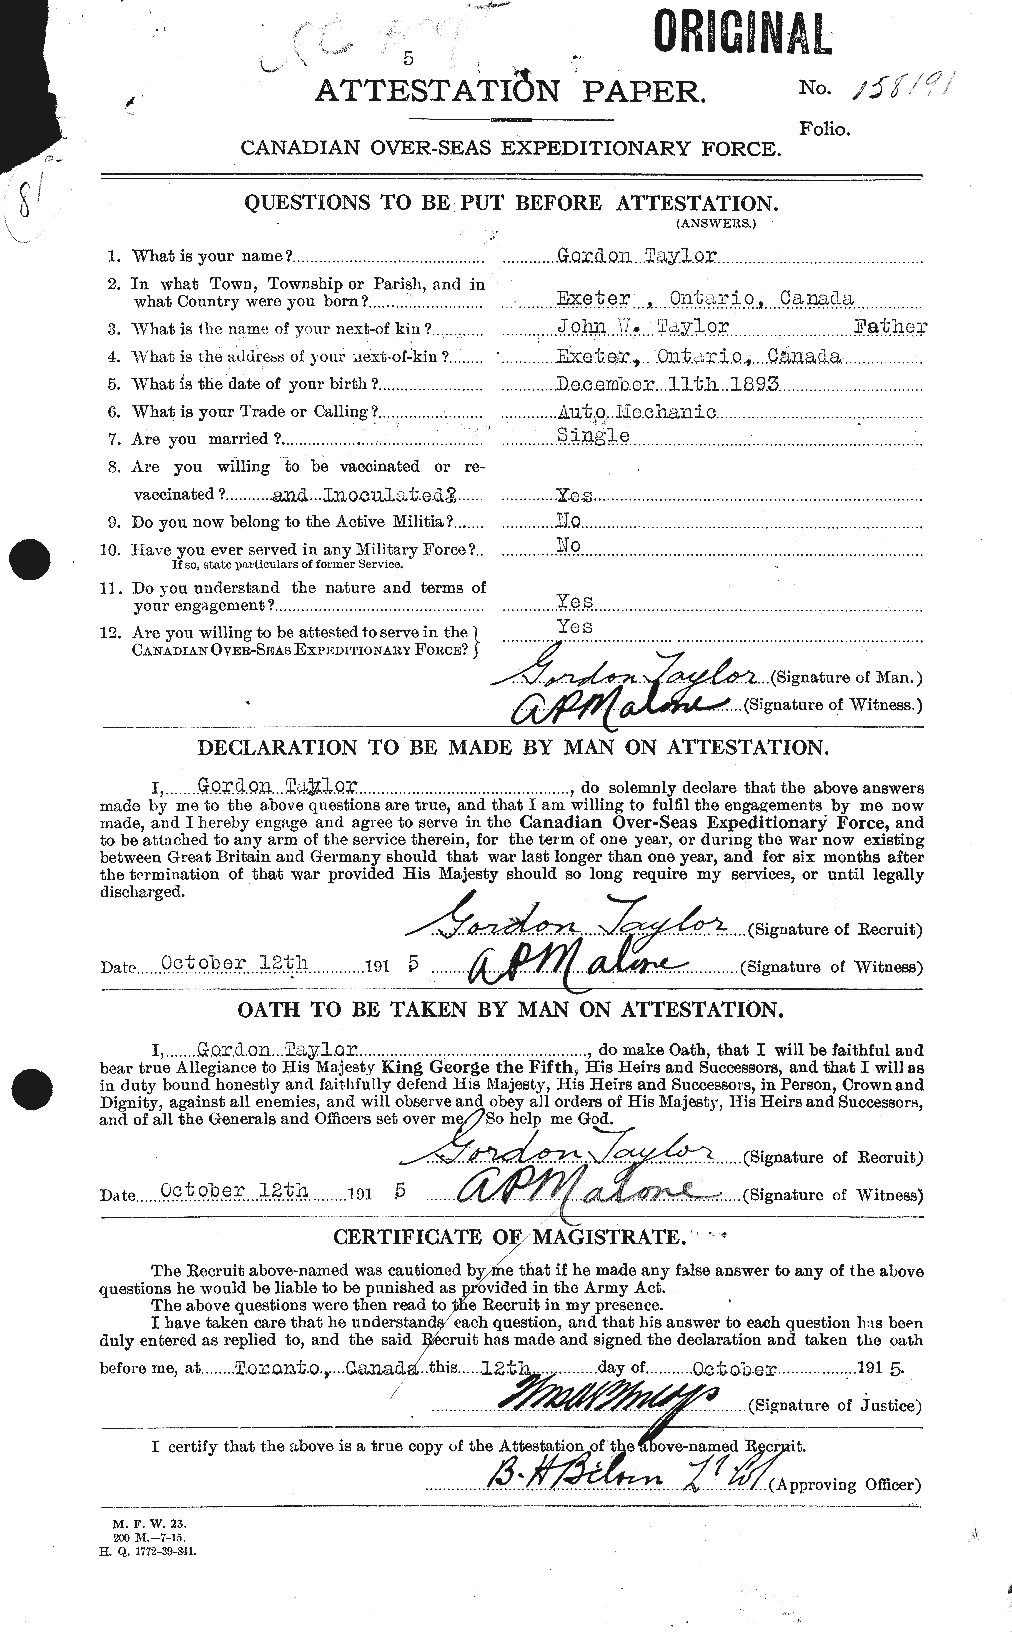 Personnel Records of the First World War - CEF 626382a